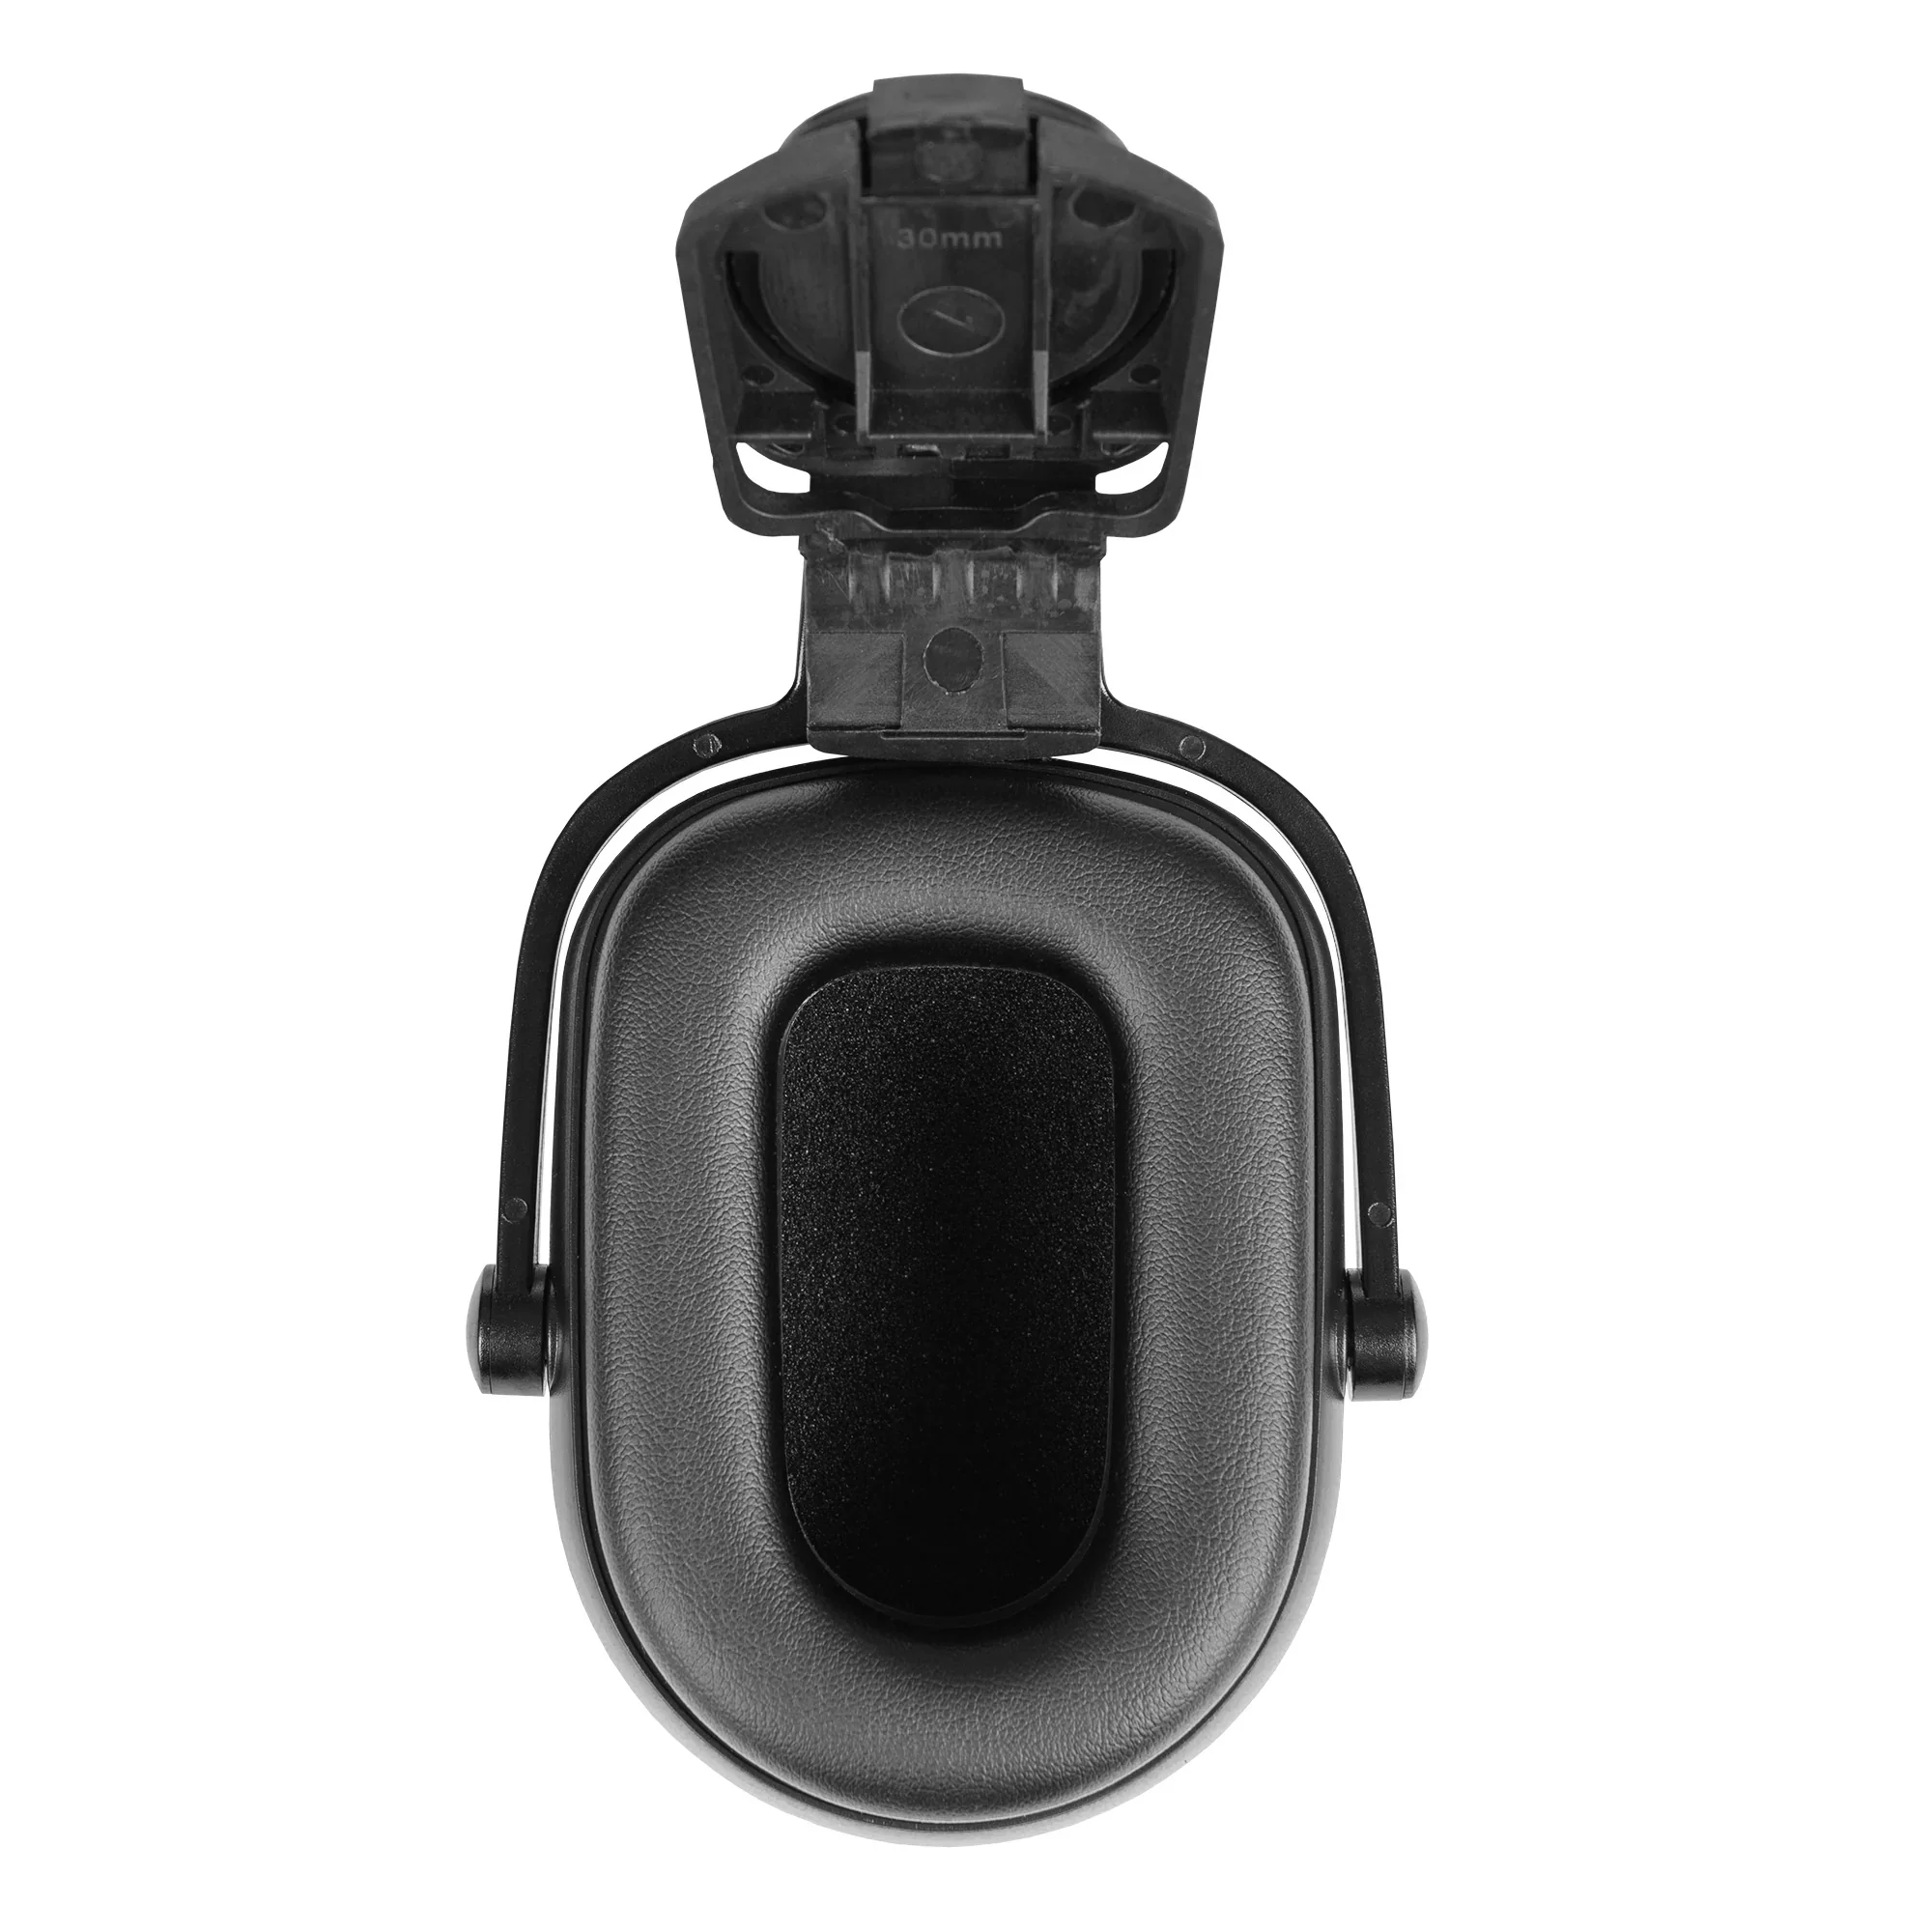 Lift Safety Noise Control Hearing Protection Muffs